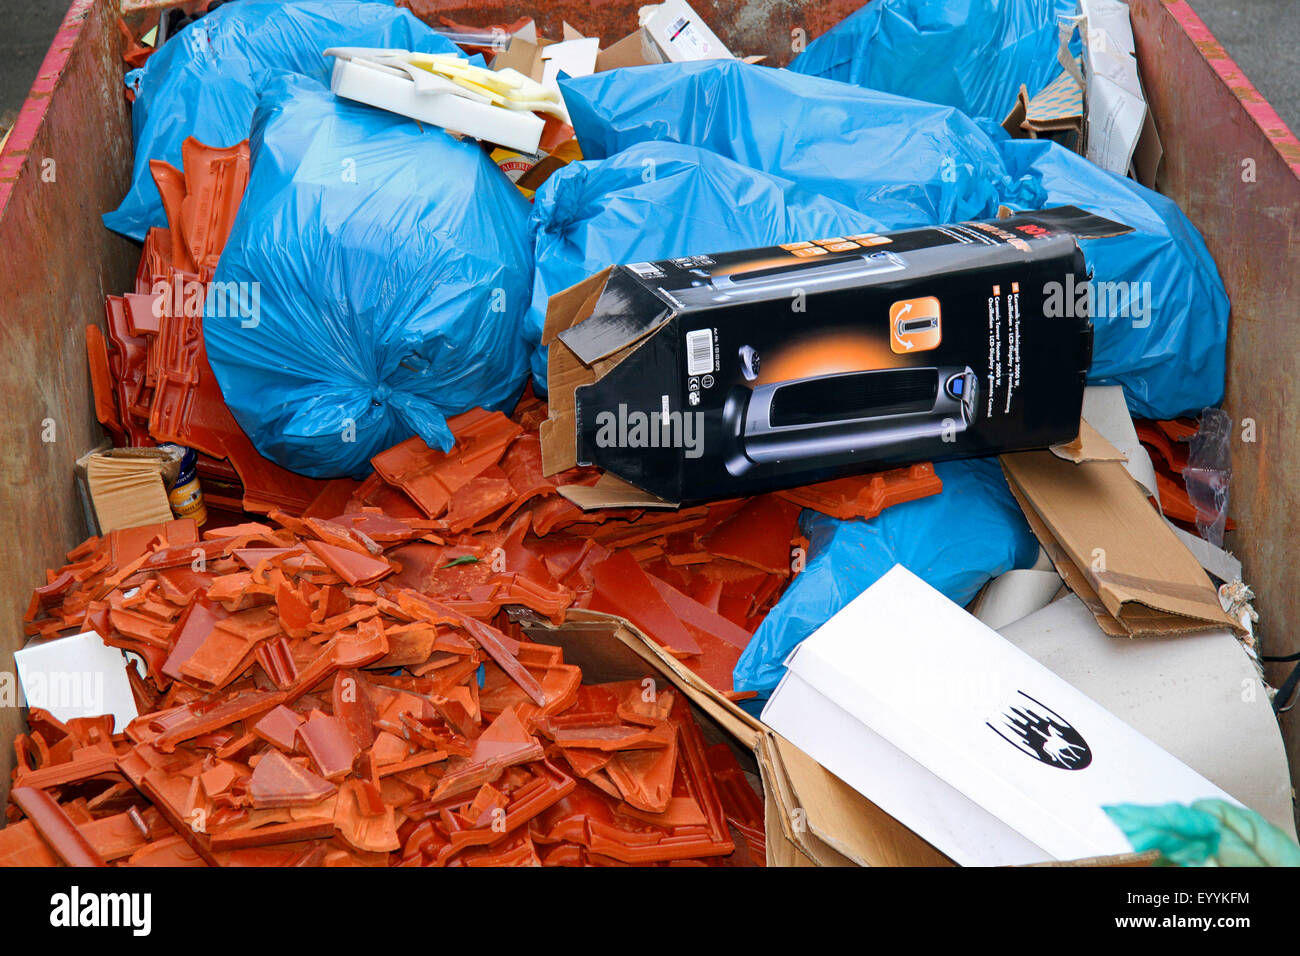 broken roof tiles and garbage in a garbage container, Germany Stock Photo